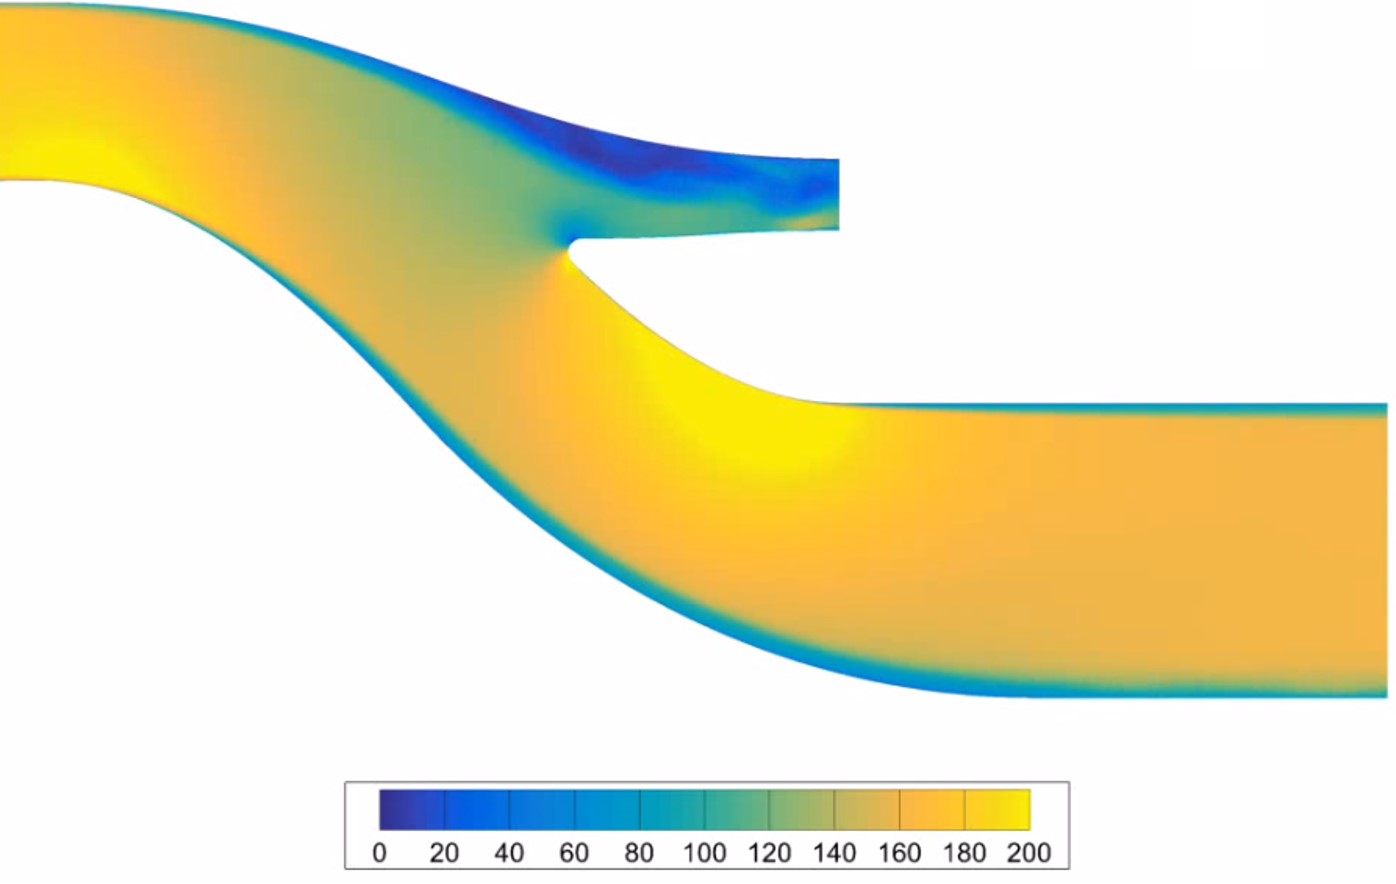 Velocity contour from a transient flow simulation